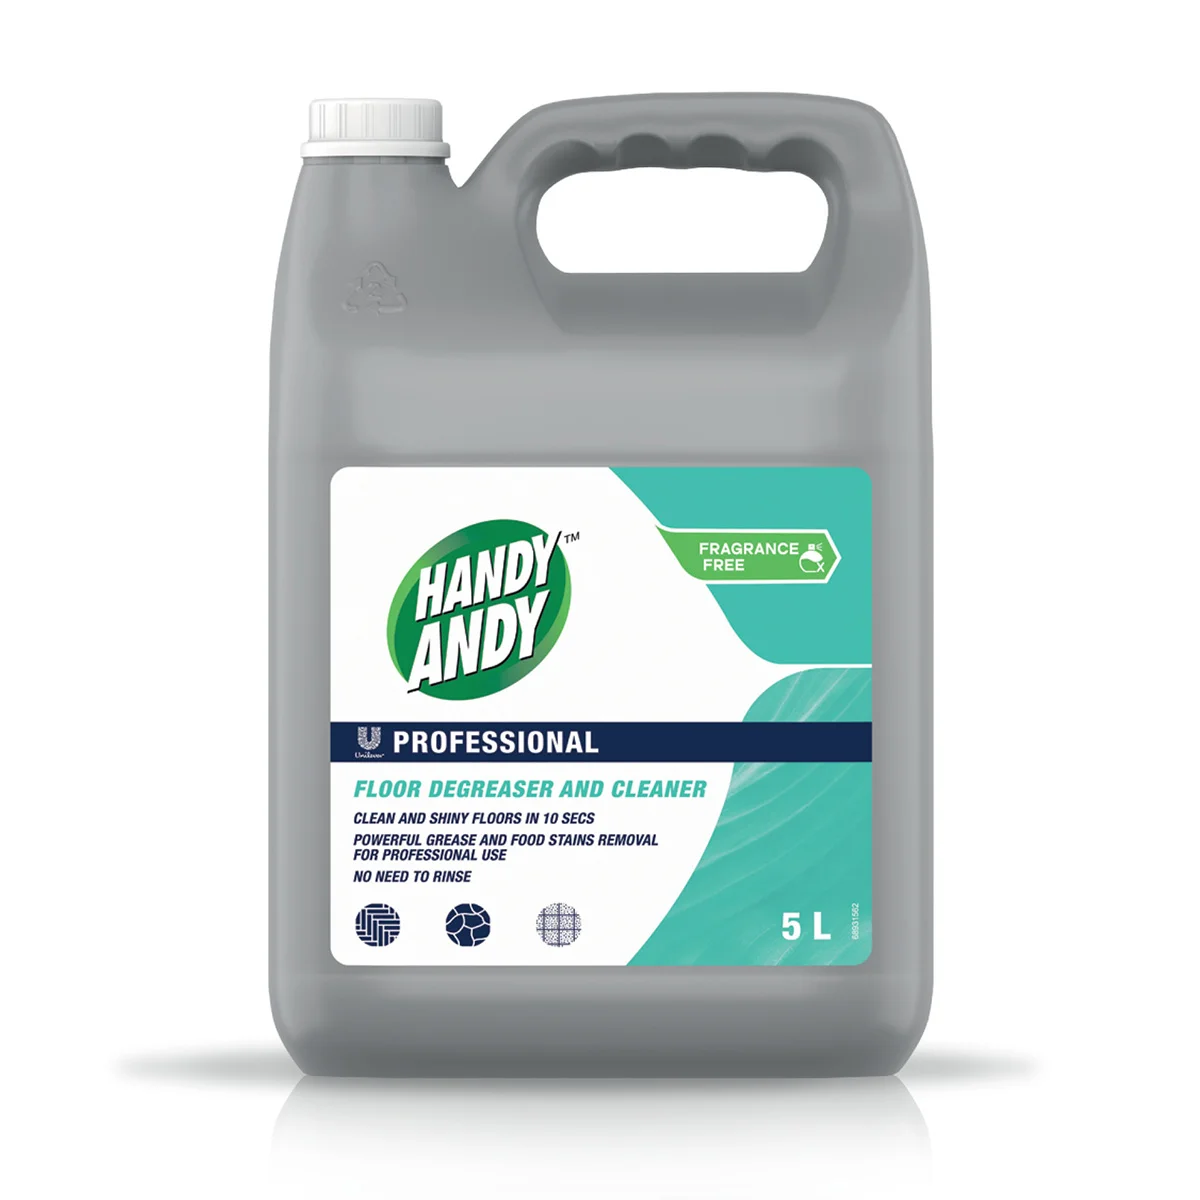 Handy Andy Professional Floor Degreaser and Cleaner - 5 L